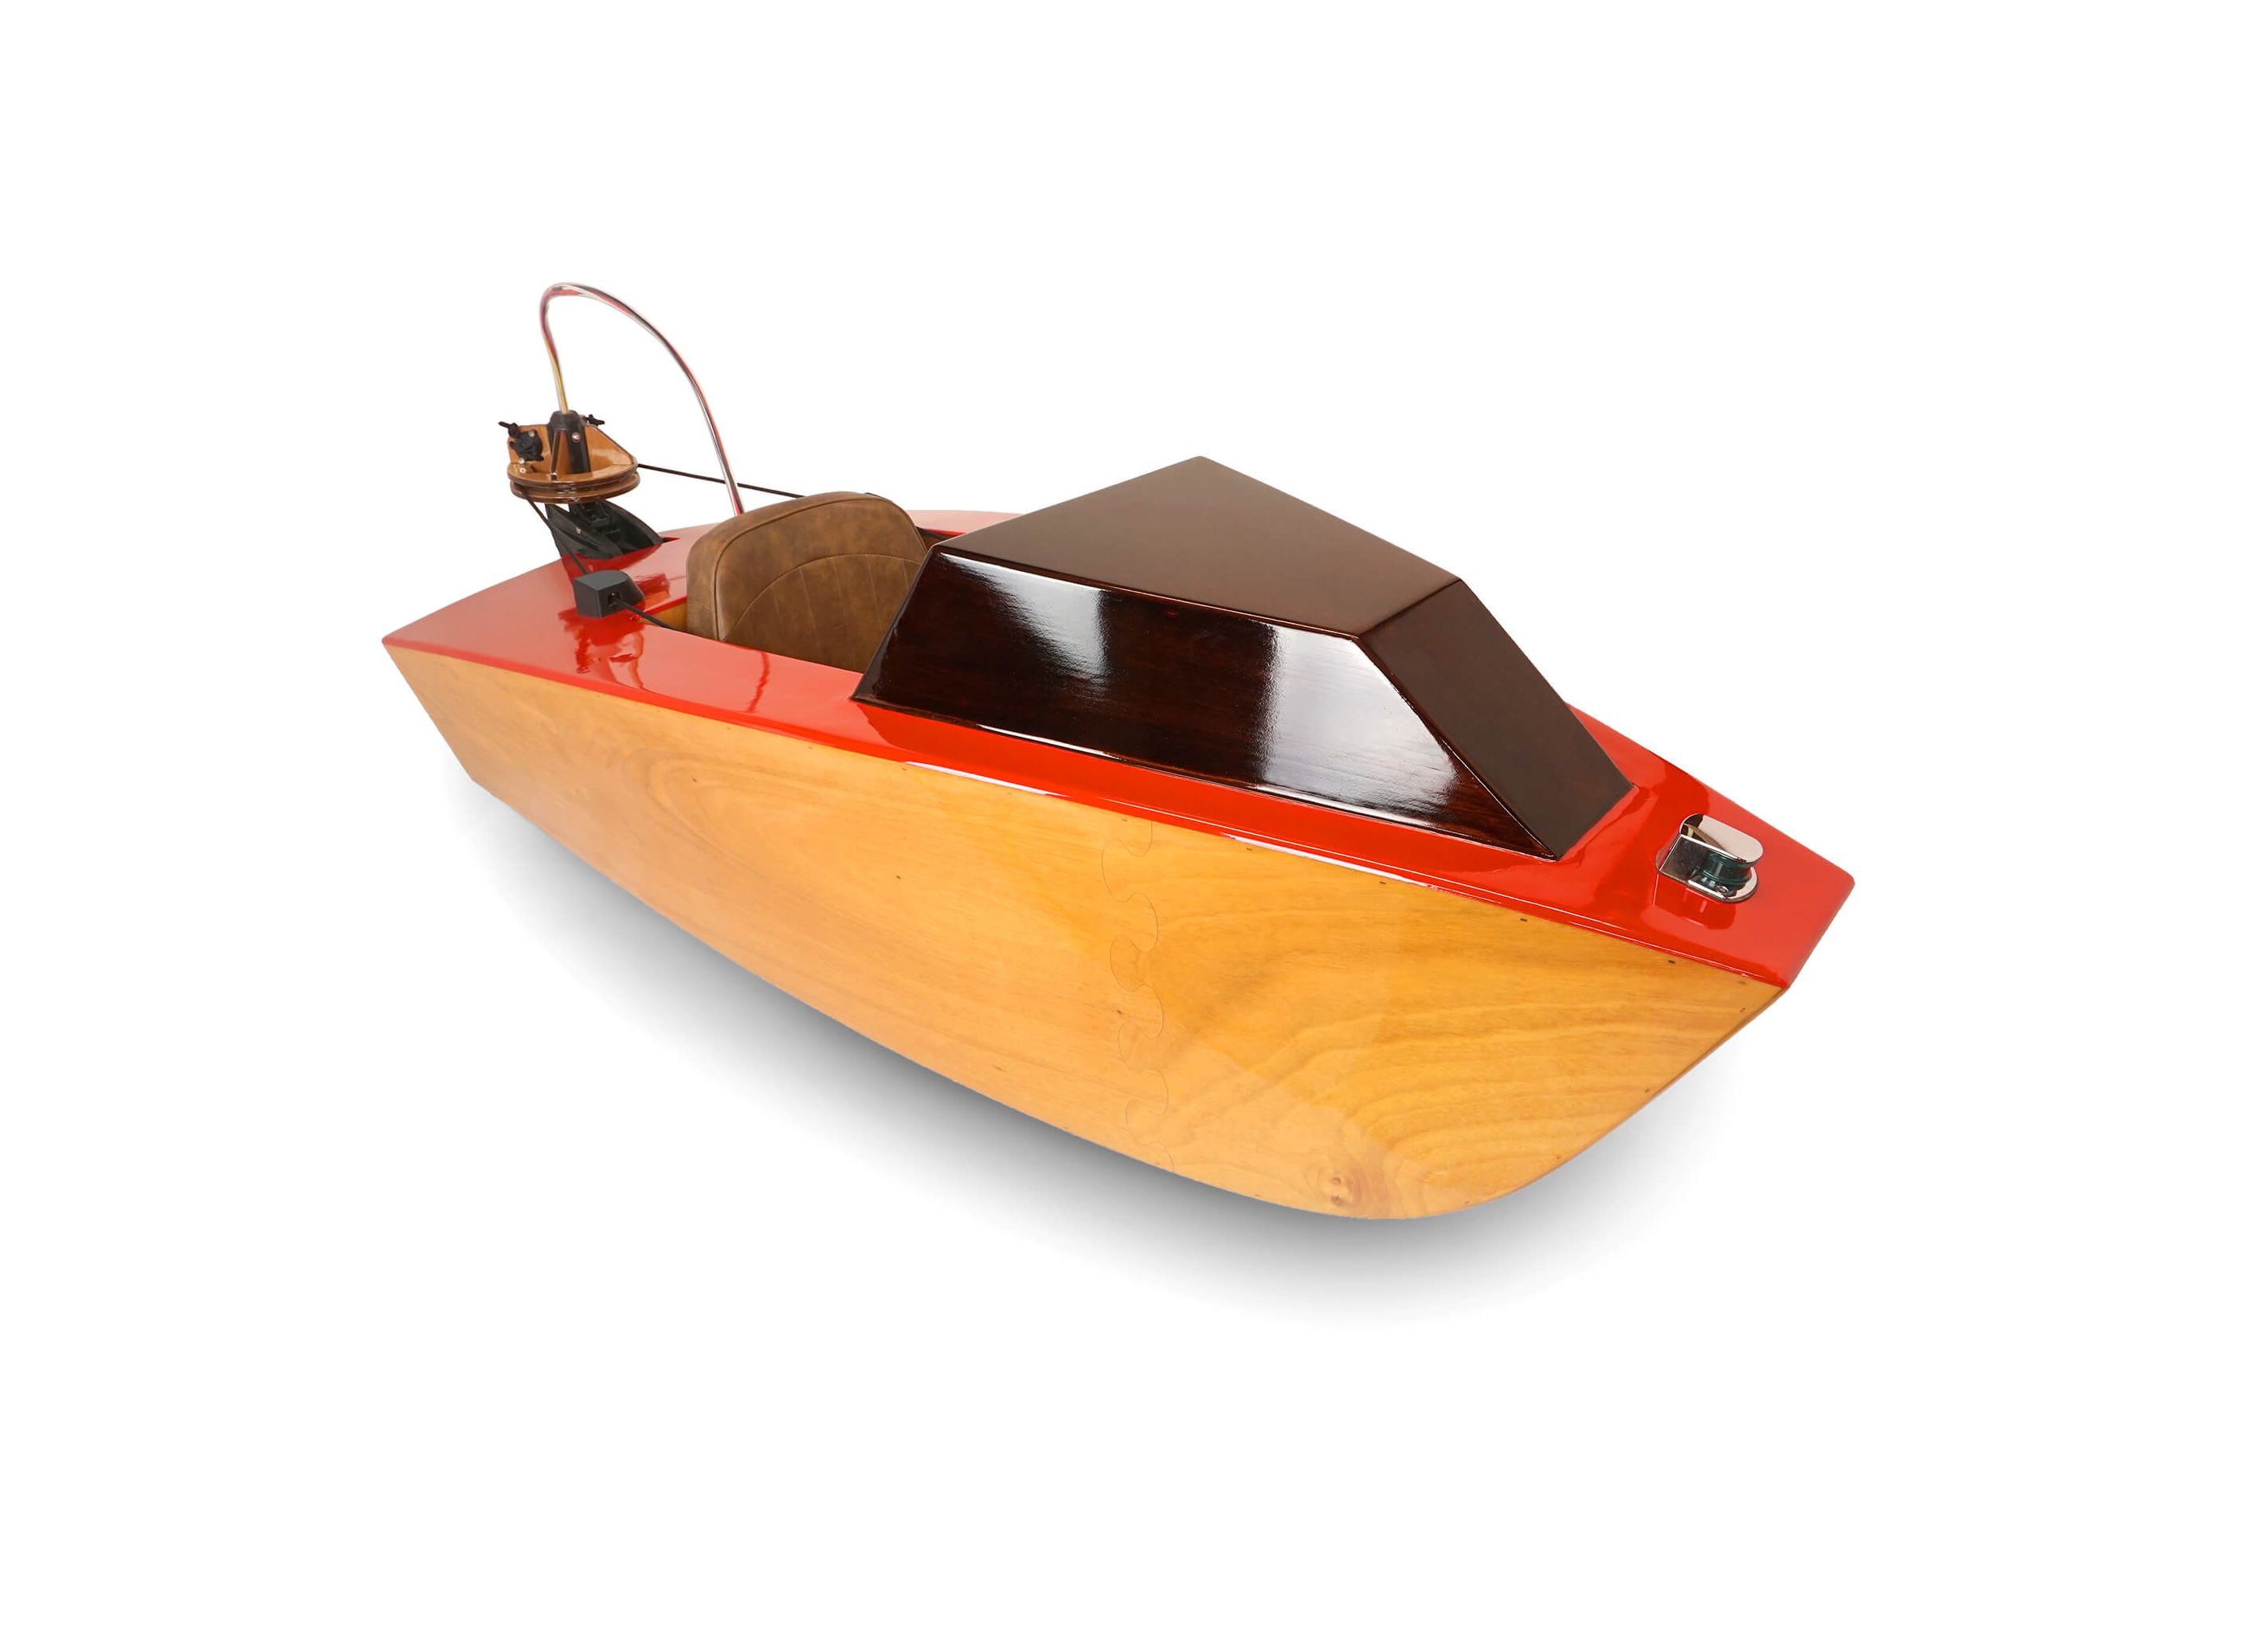 Rapid Whale Mini Boat - An Electrically Powered Kit-Built 